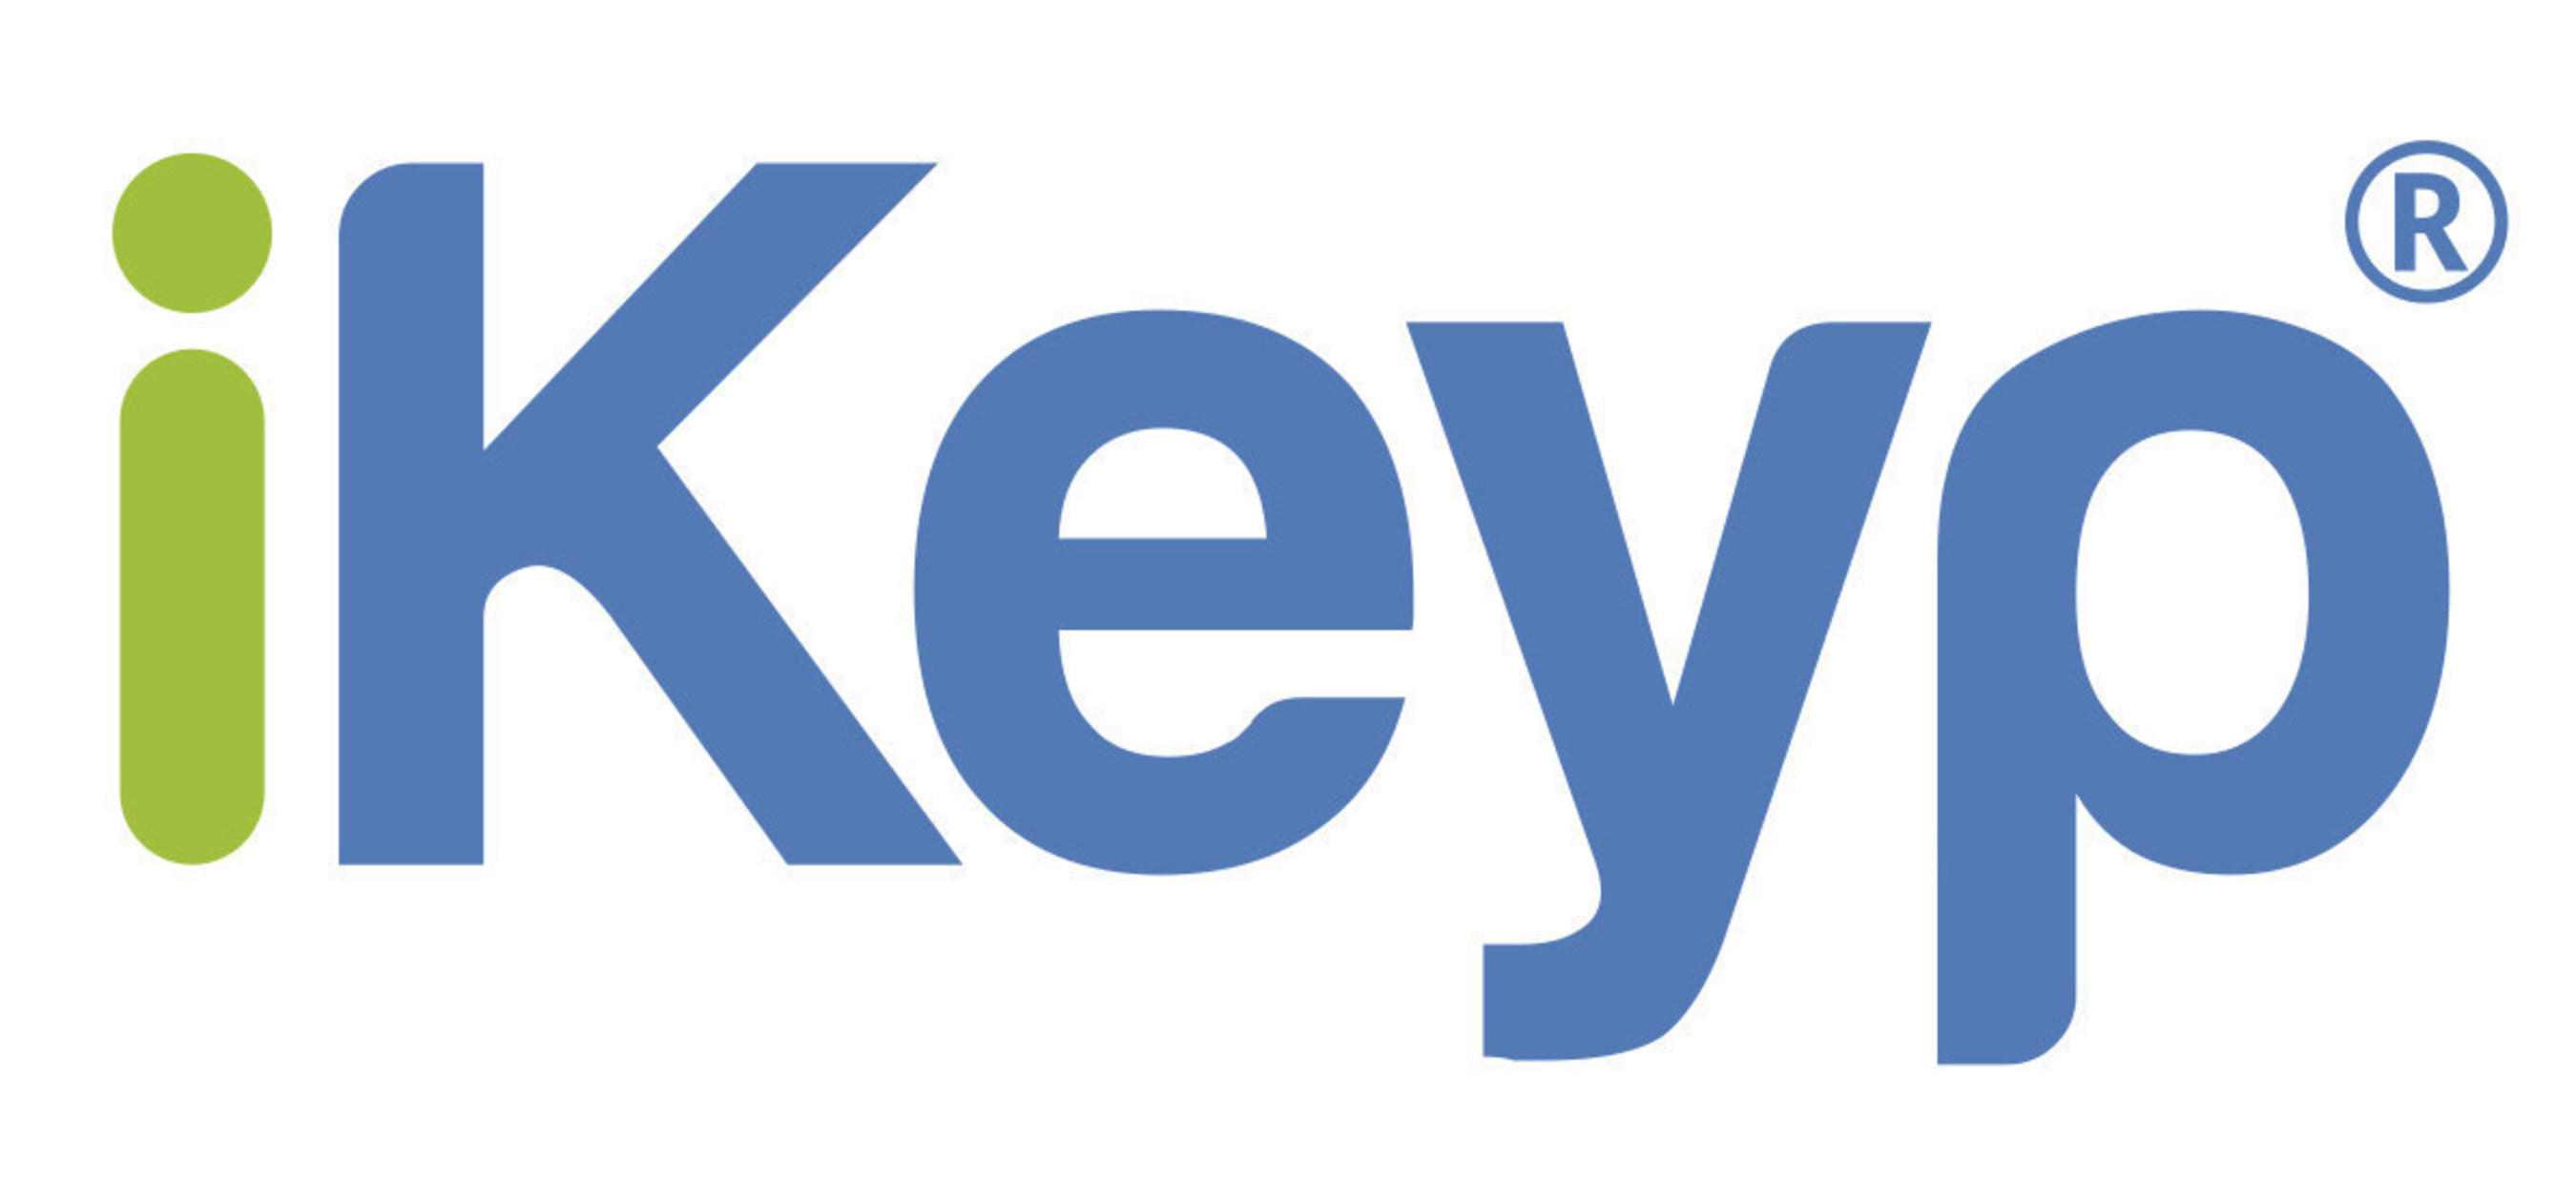 The iKeyp is the first smartphone-enabled personal safe designed to safeguard both prescription medications and valuables.